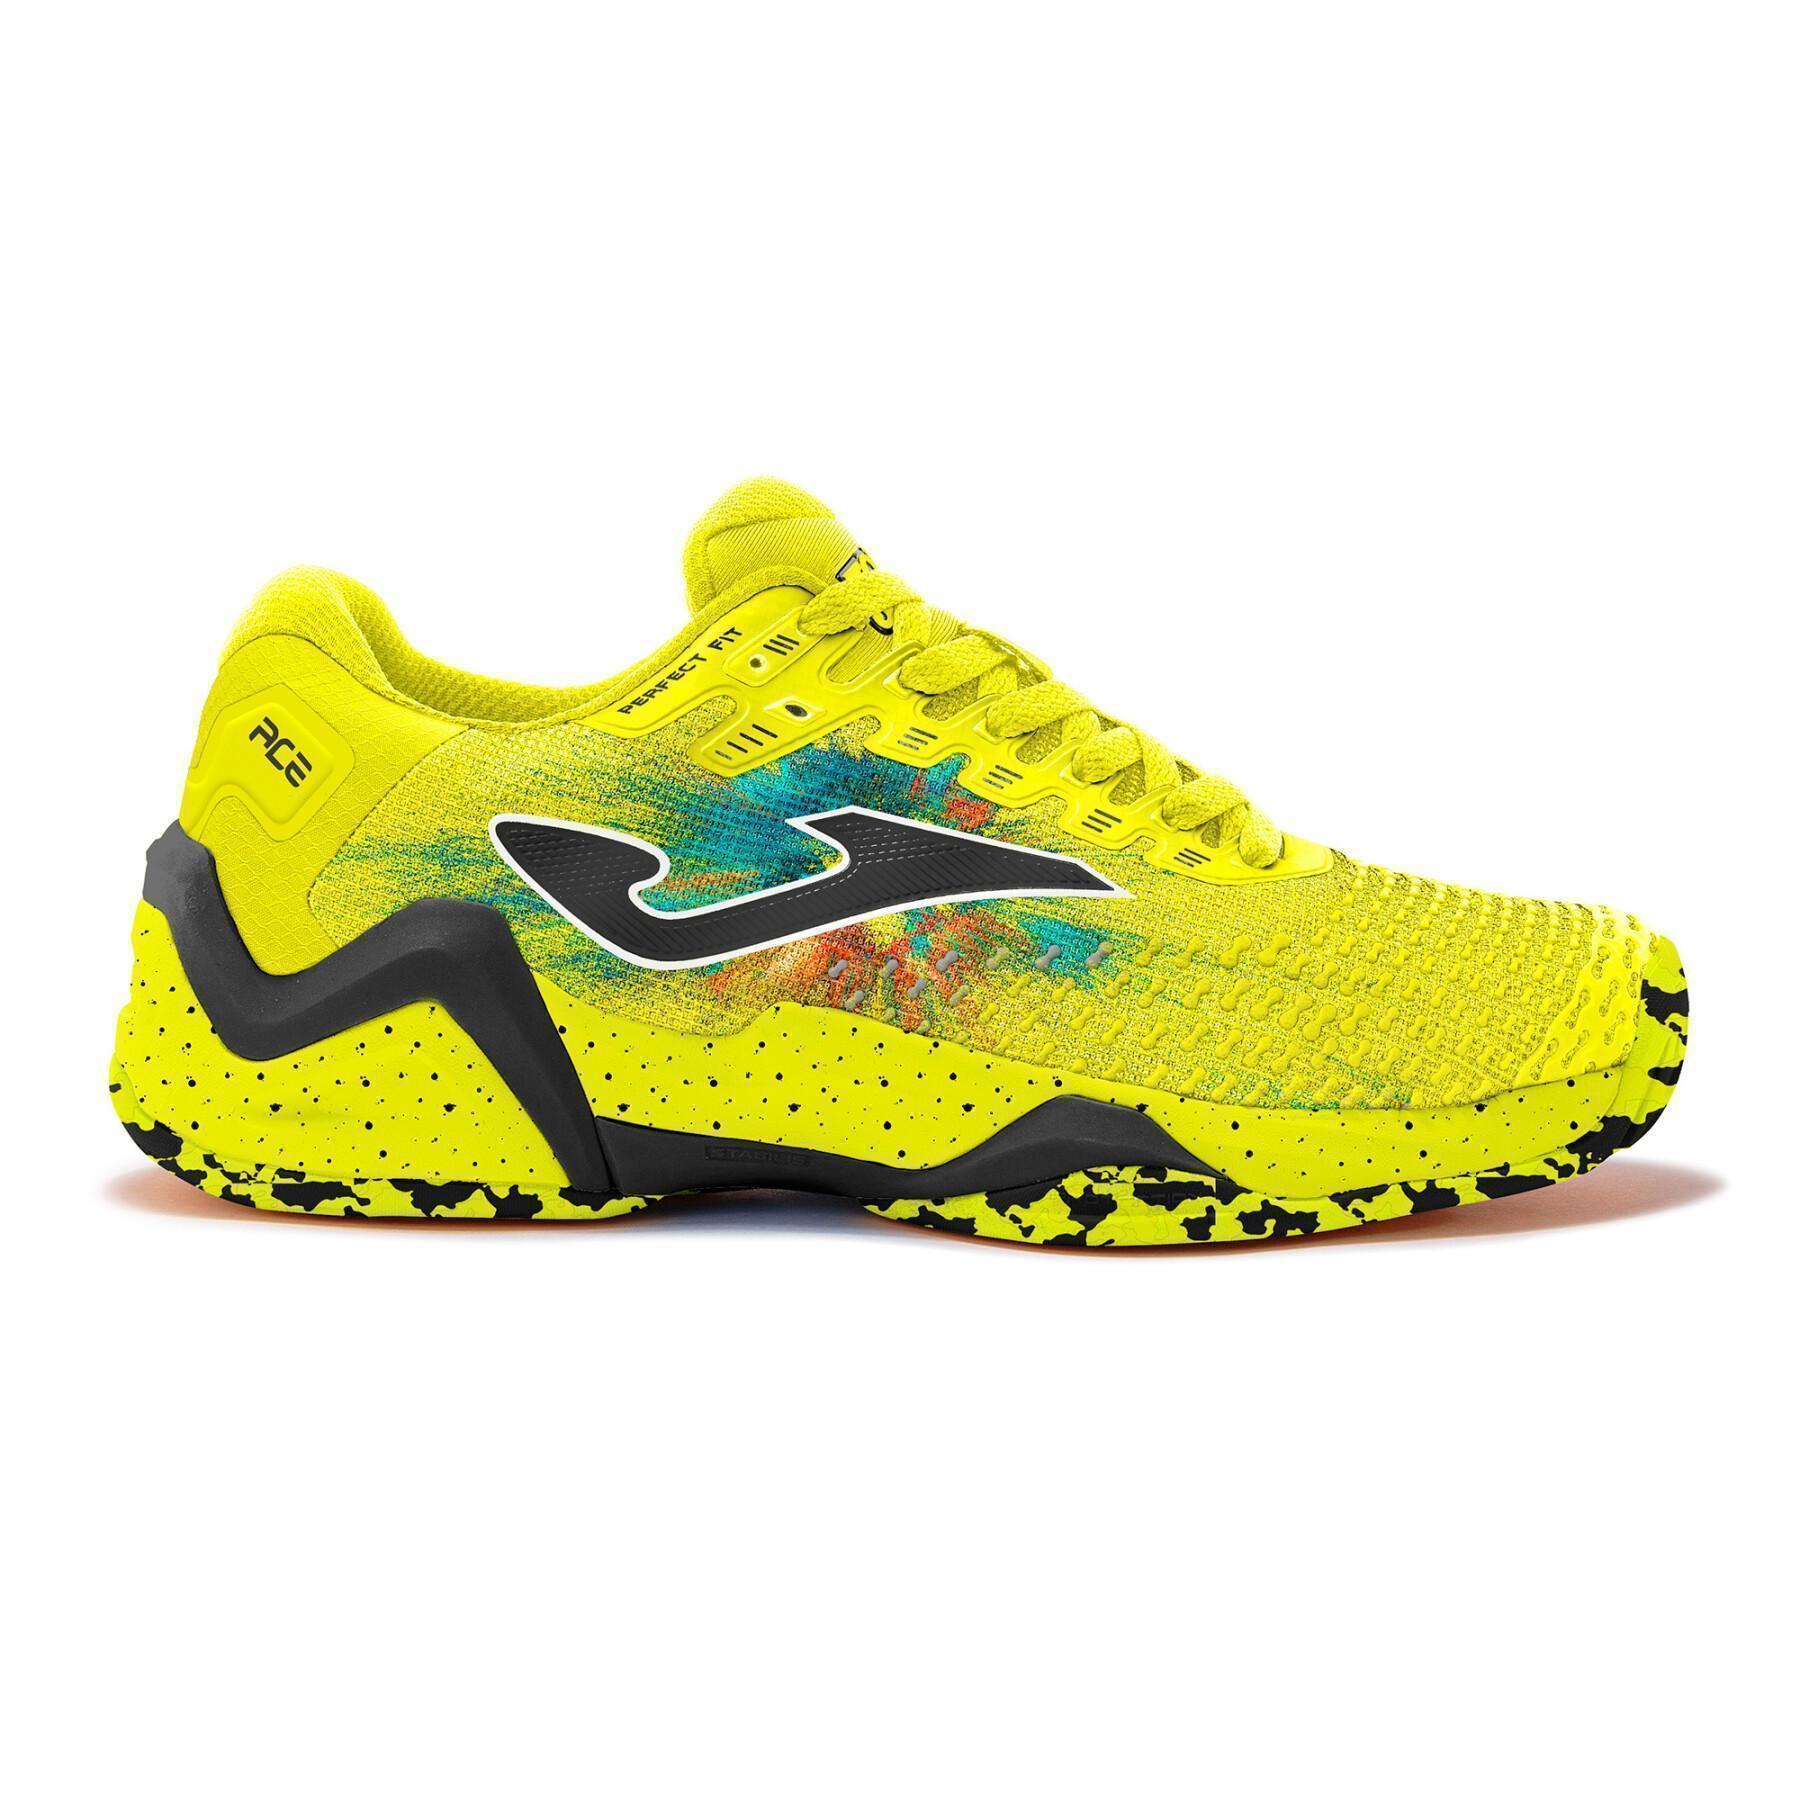 Tennis shoes Joma Ace 2309